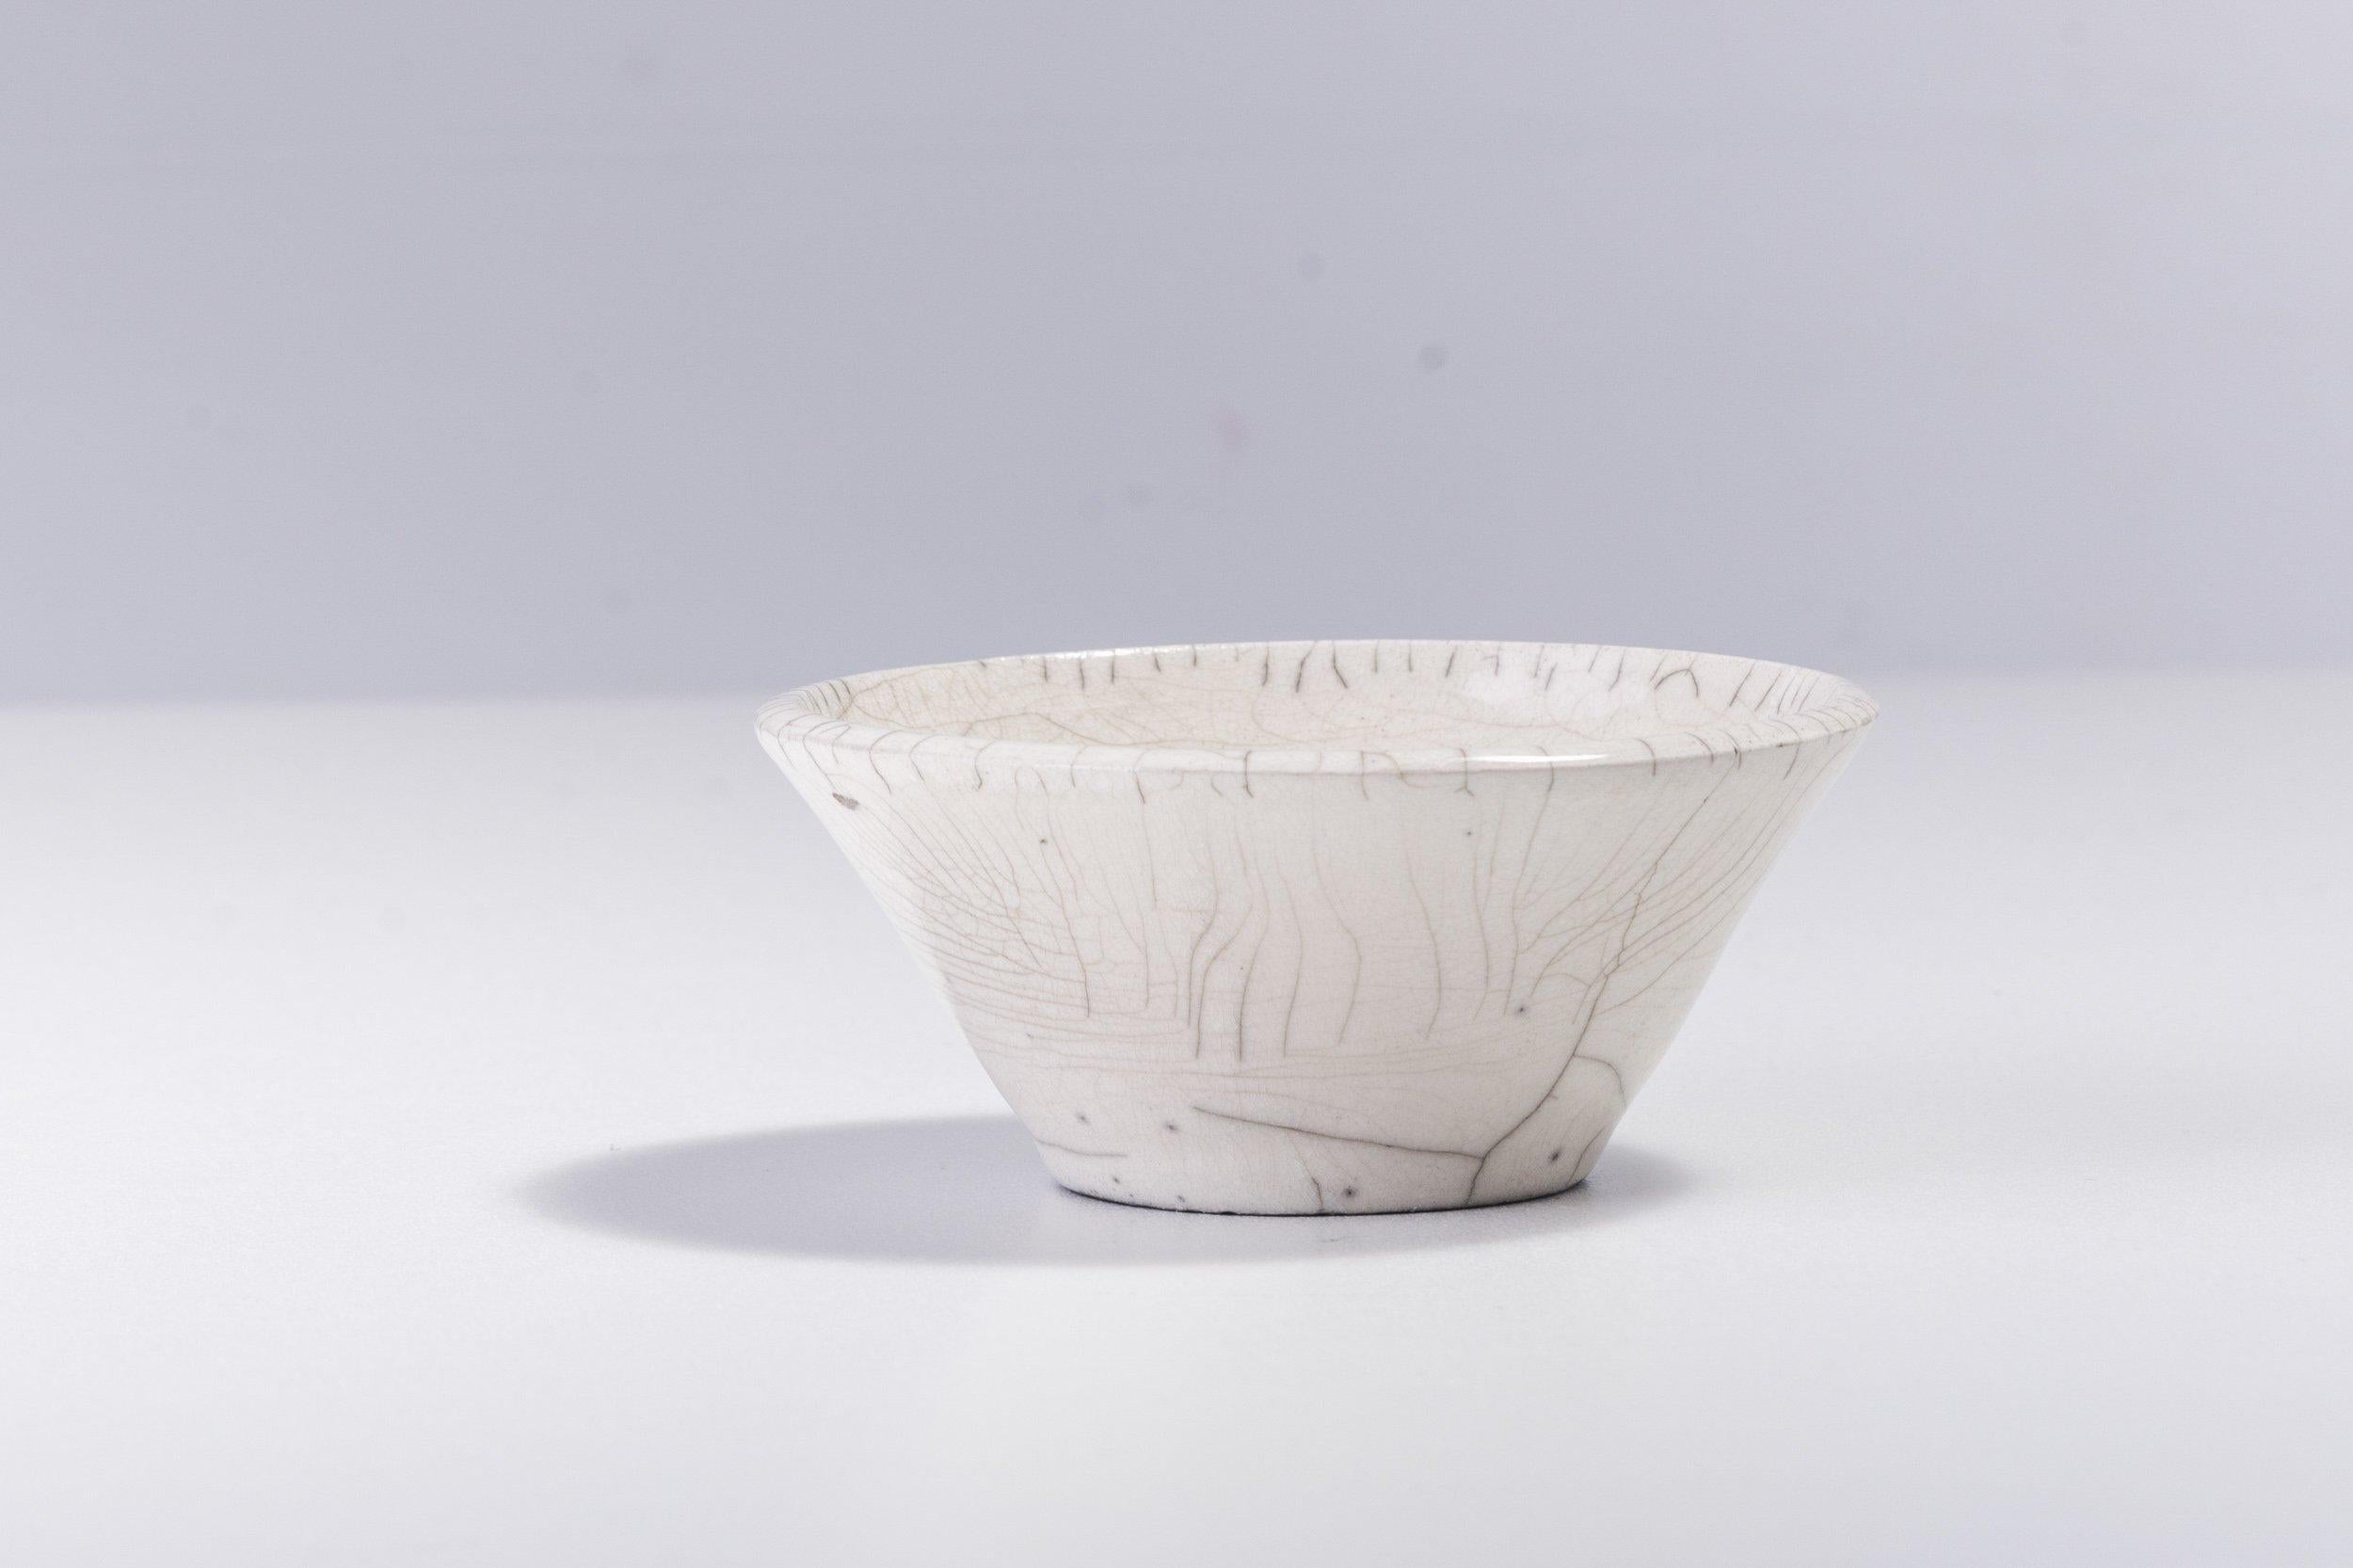 Functional design and sublime technique merge in this spectacular bowl, handcrafted of ceramic following the Japanese technique of naked Raku firing. This unique piece is graced with a sophisticated patchwork of delicate grey cracks enhancing its